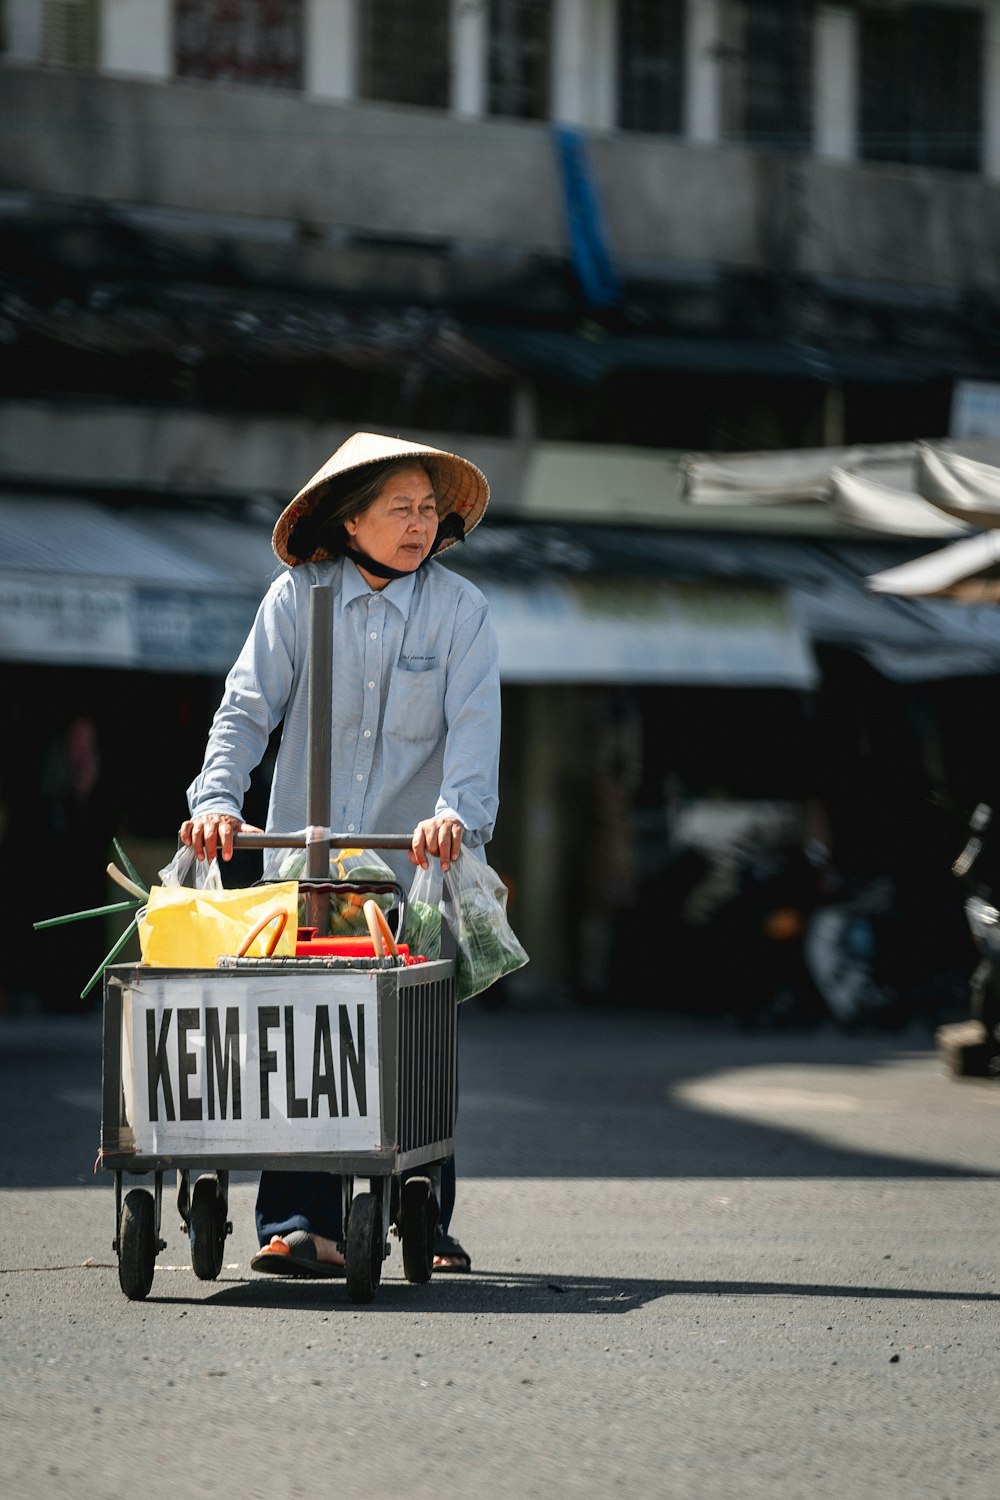 a young boy pushing a cart with a sign on it